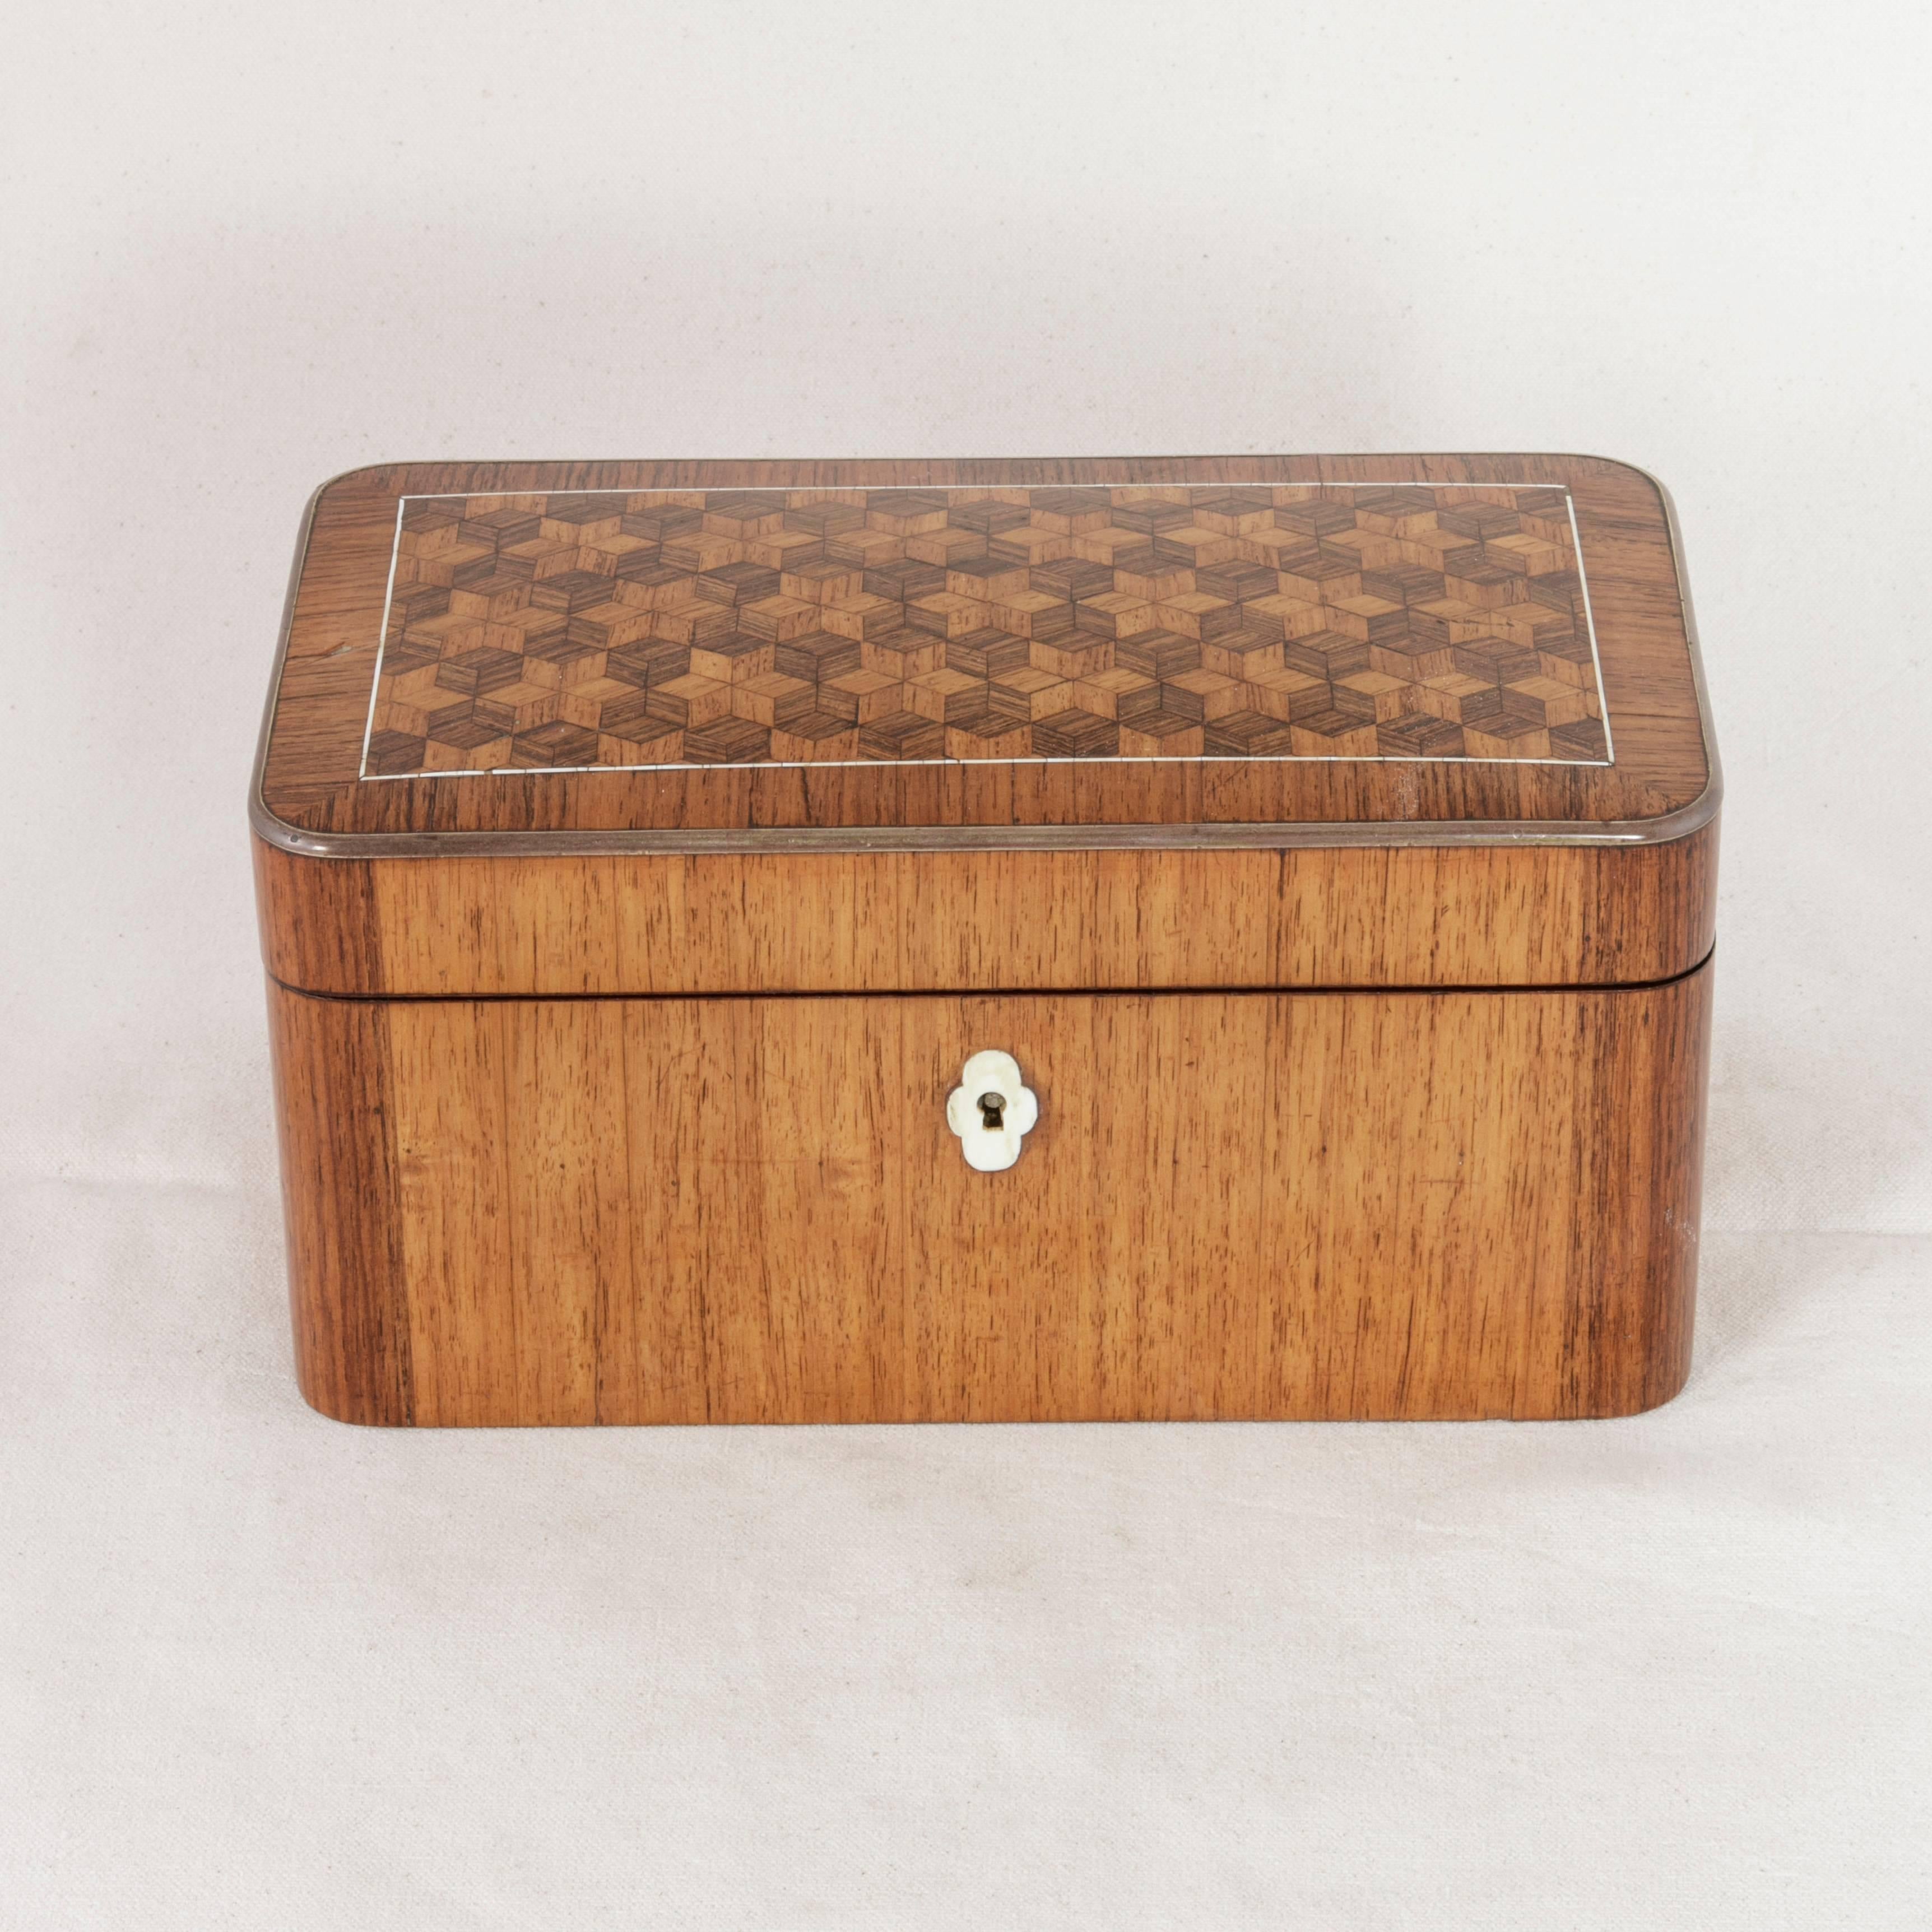 This 19th century, Napoleon III period teabox or tea caddy features marquetry of walnut and rosewood in an intricate hexagram pattern surrounded by a delicate line of bone inlay which complements the bone key surround. Bronze edging around the top's